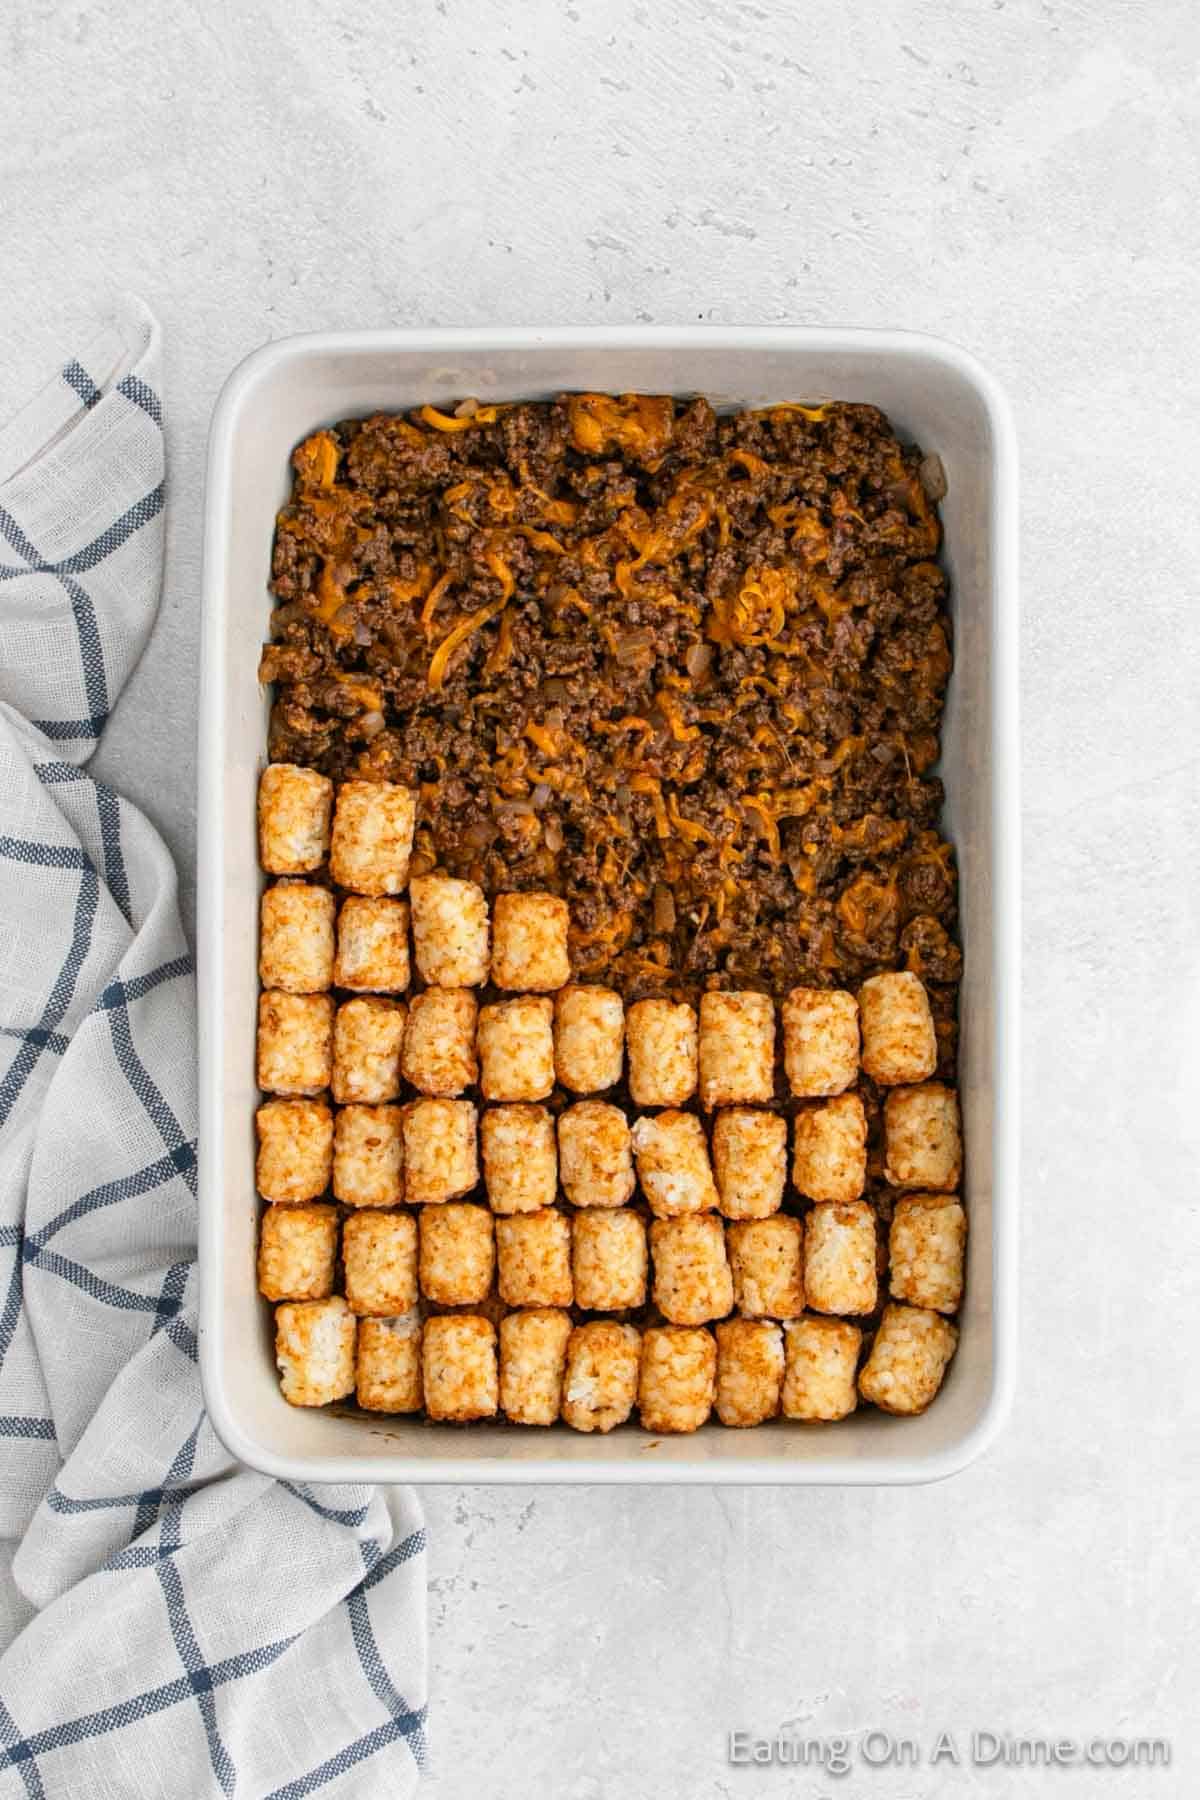 Layering ground beef mixture in a baking dish and topped with tator tots